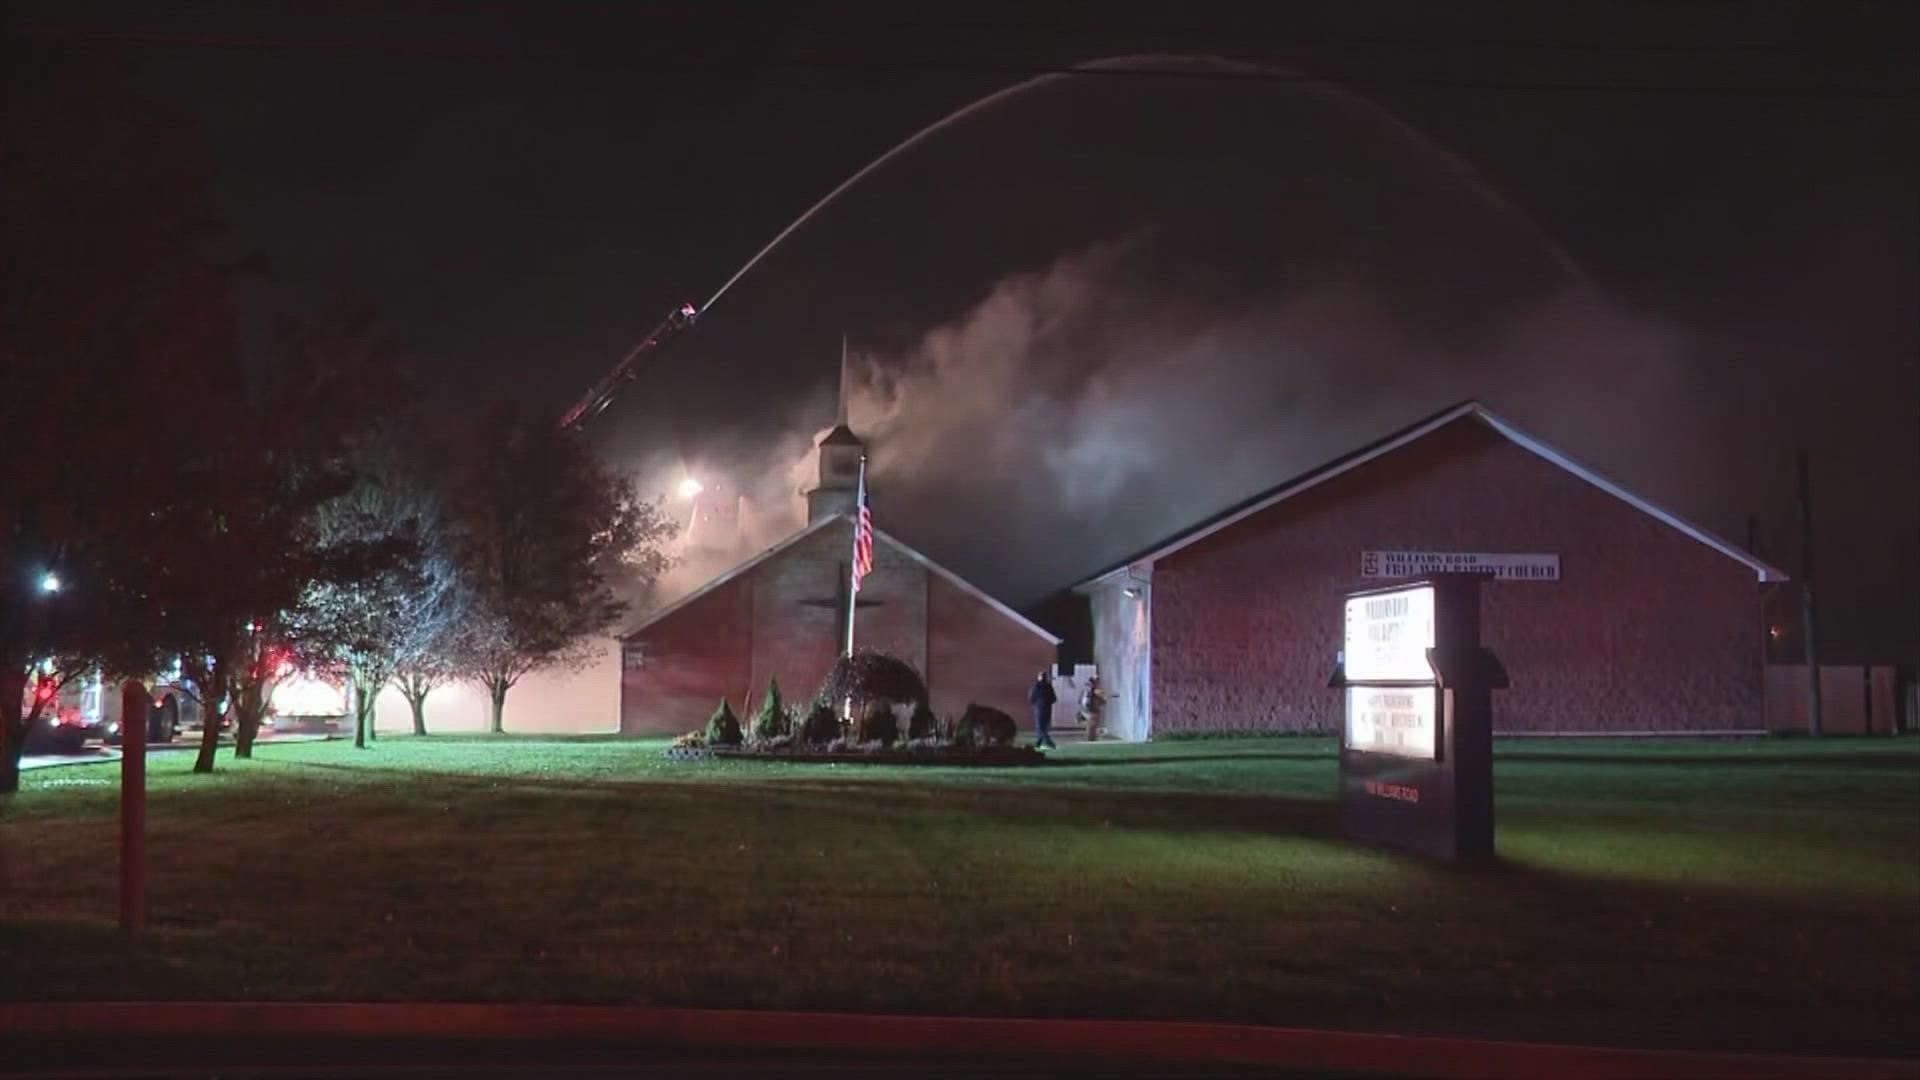 Last Sunday, the sanctuary of the Williams Road Free Will Baptist Church caught fire.